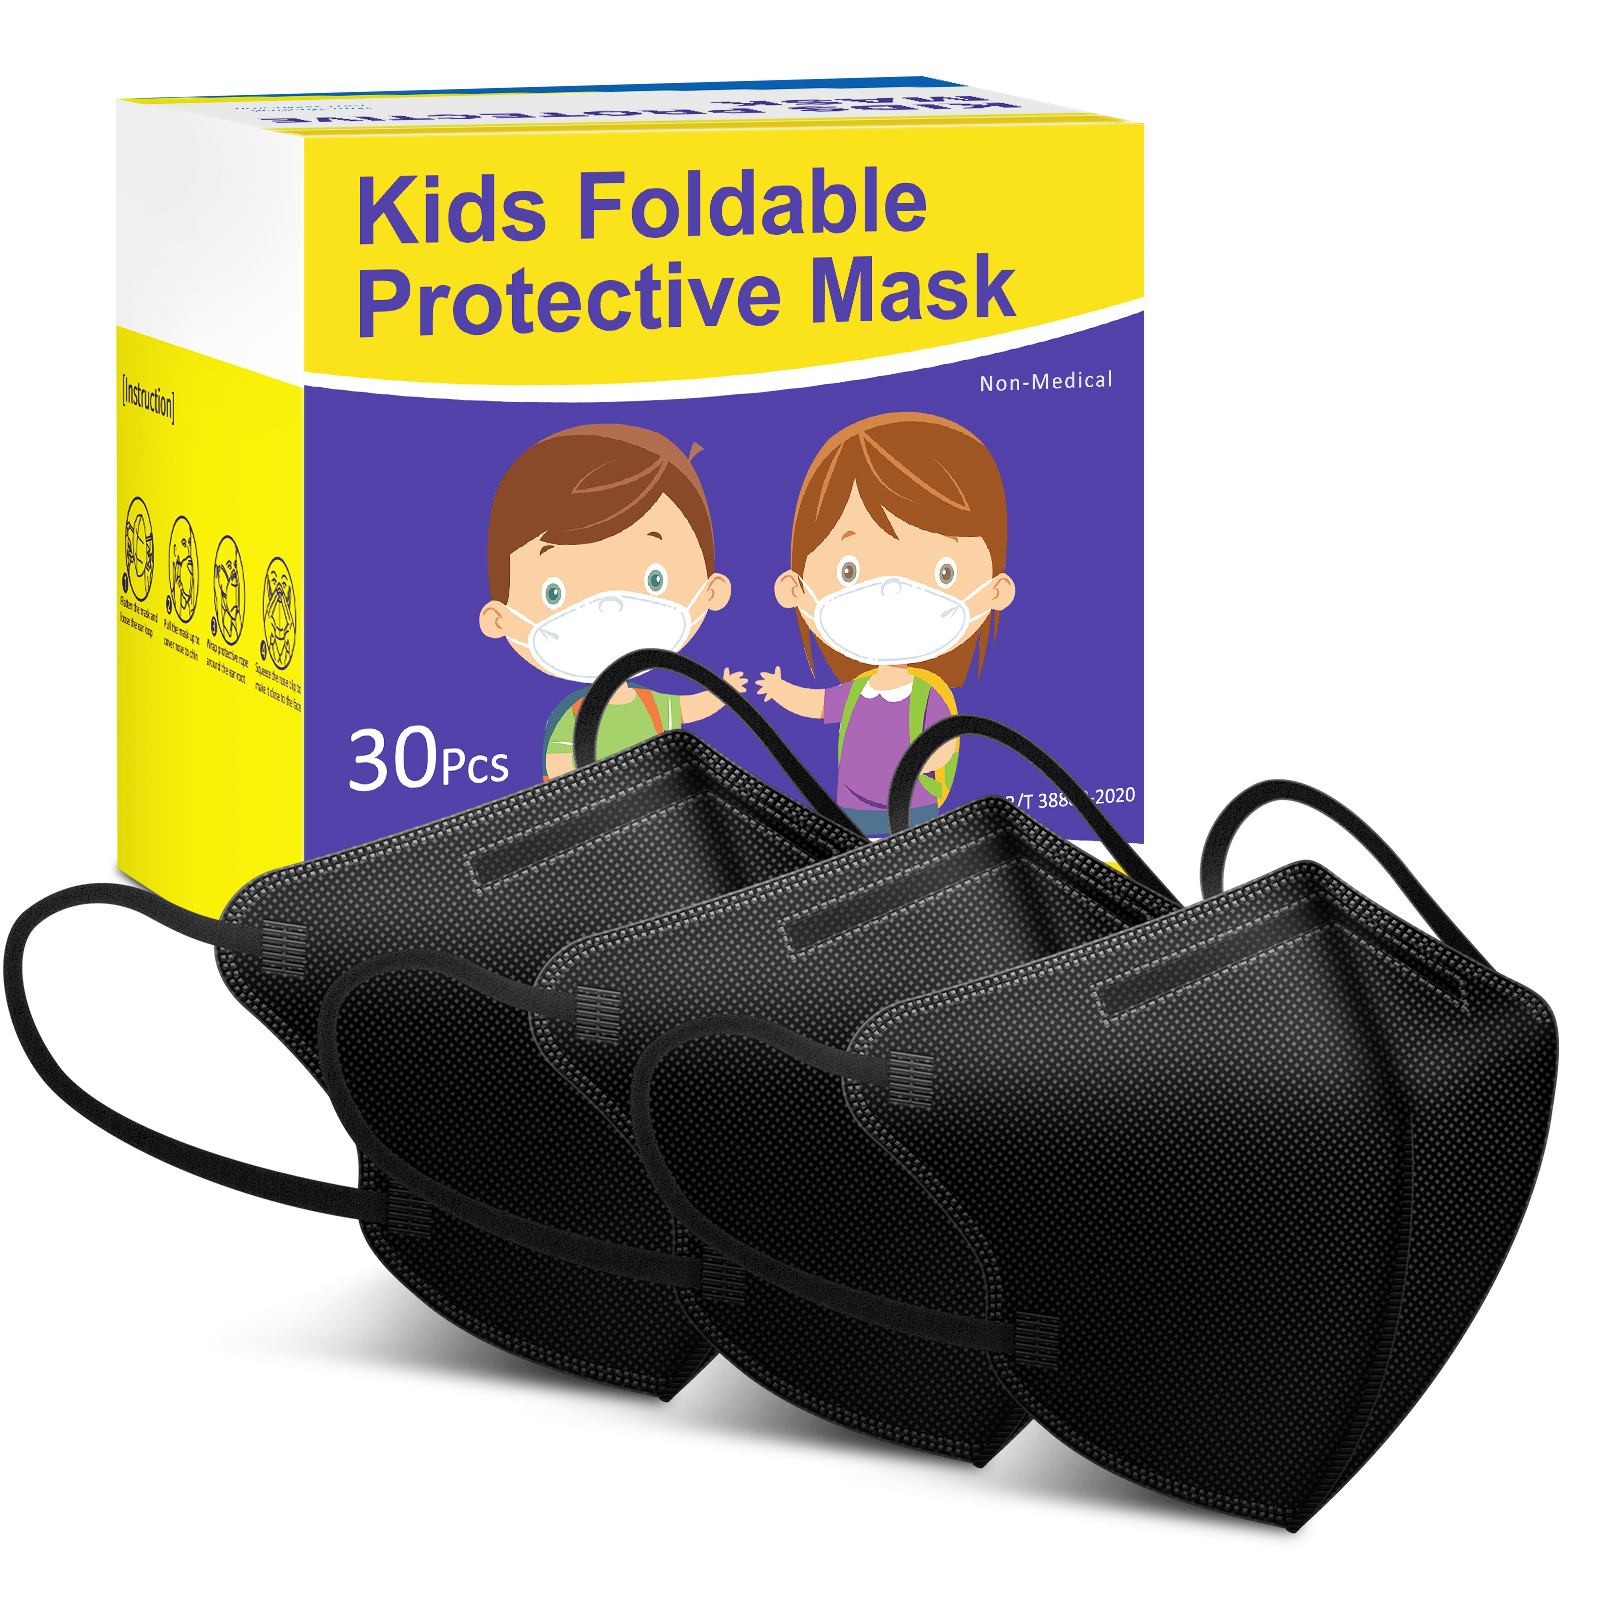 Hotodeal breathable 4-ply kids disposable face masks 30 pcs for $4 + Free shipping